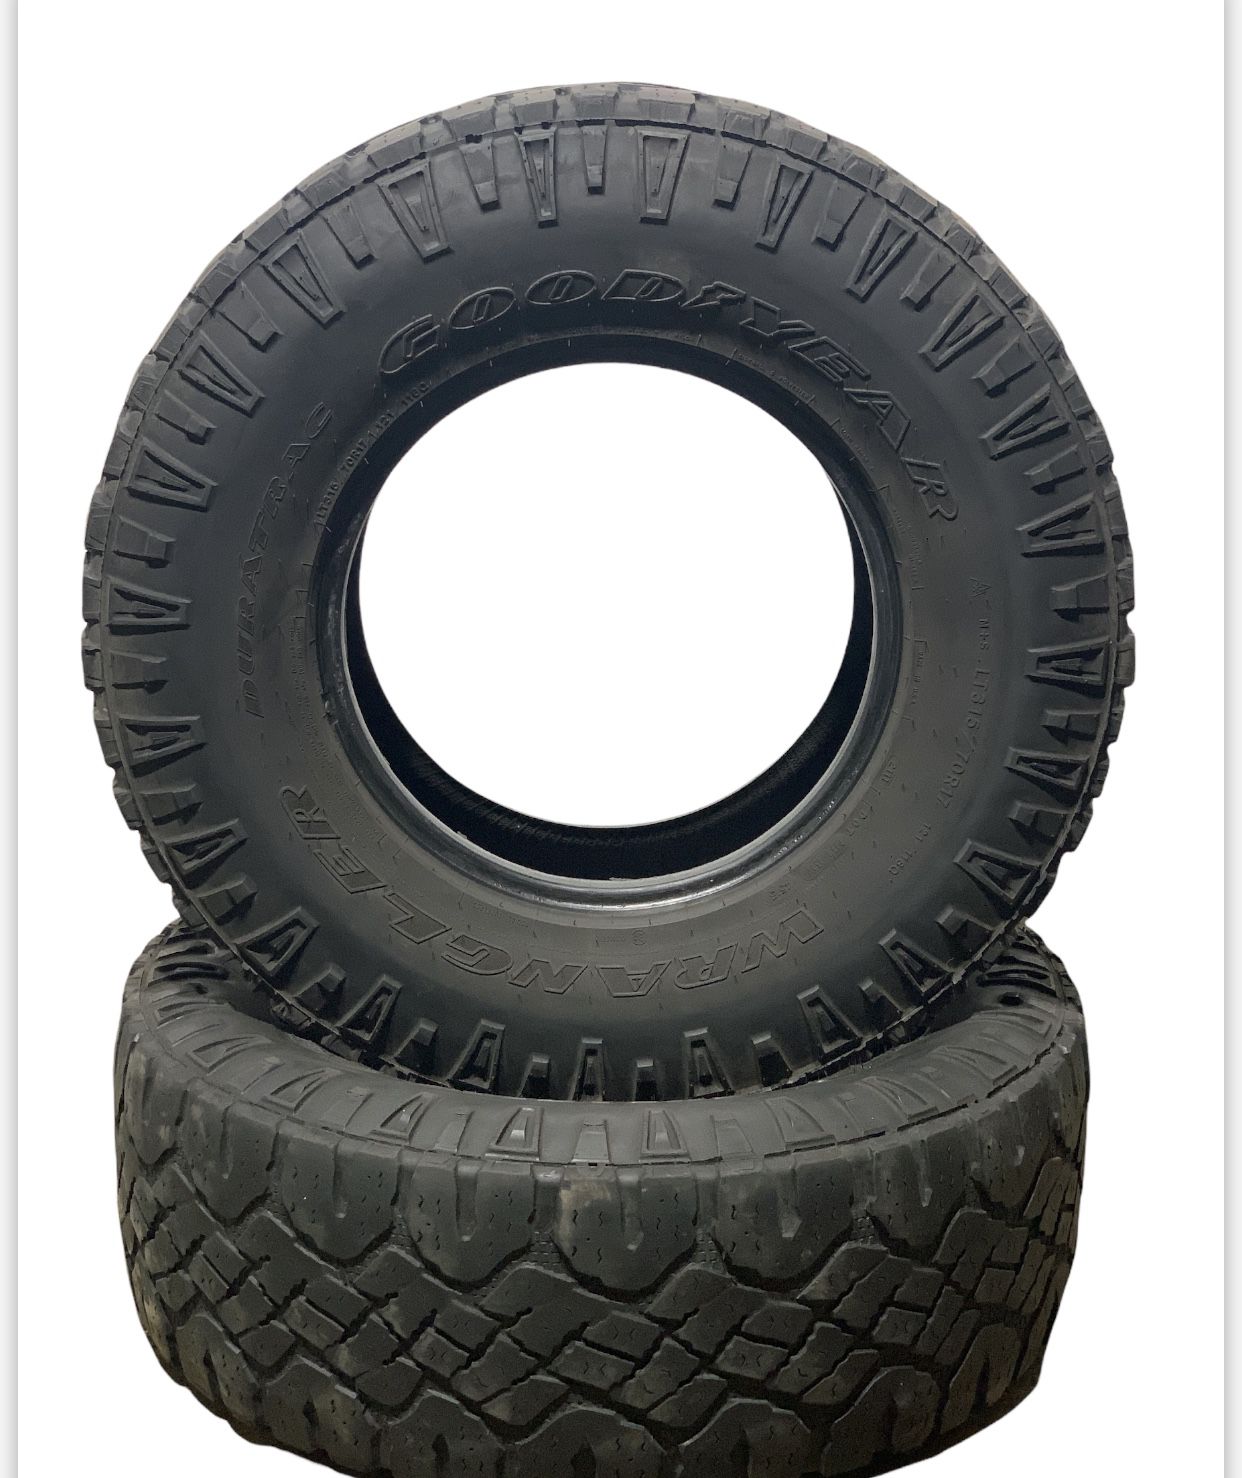 315 70 17 315/70R17 Goodyear Wrangler Duratrac (2 Used Tires) for Sale in  Chicago Heights, IL - OfferUp